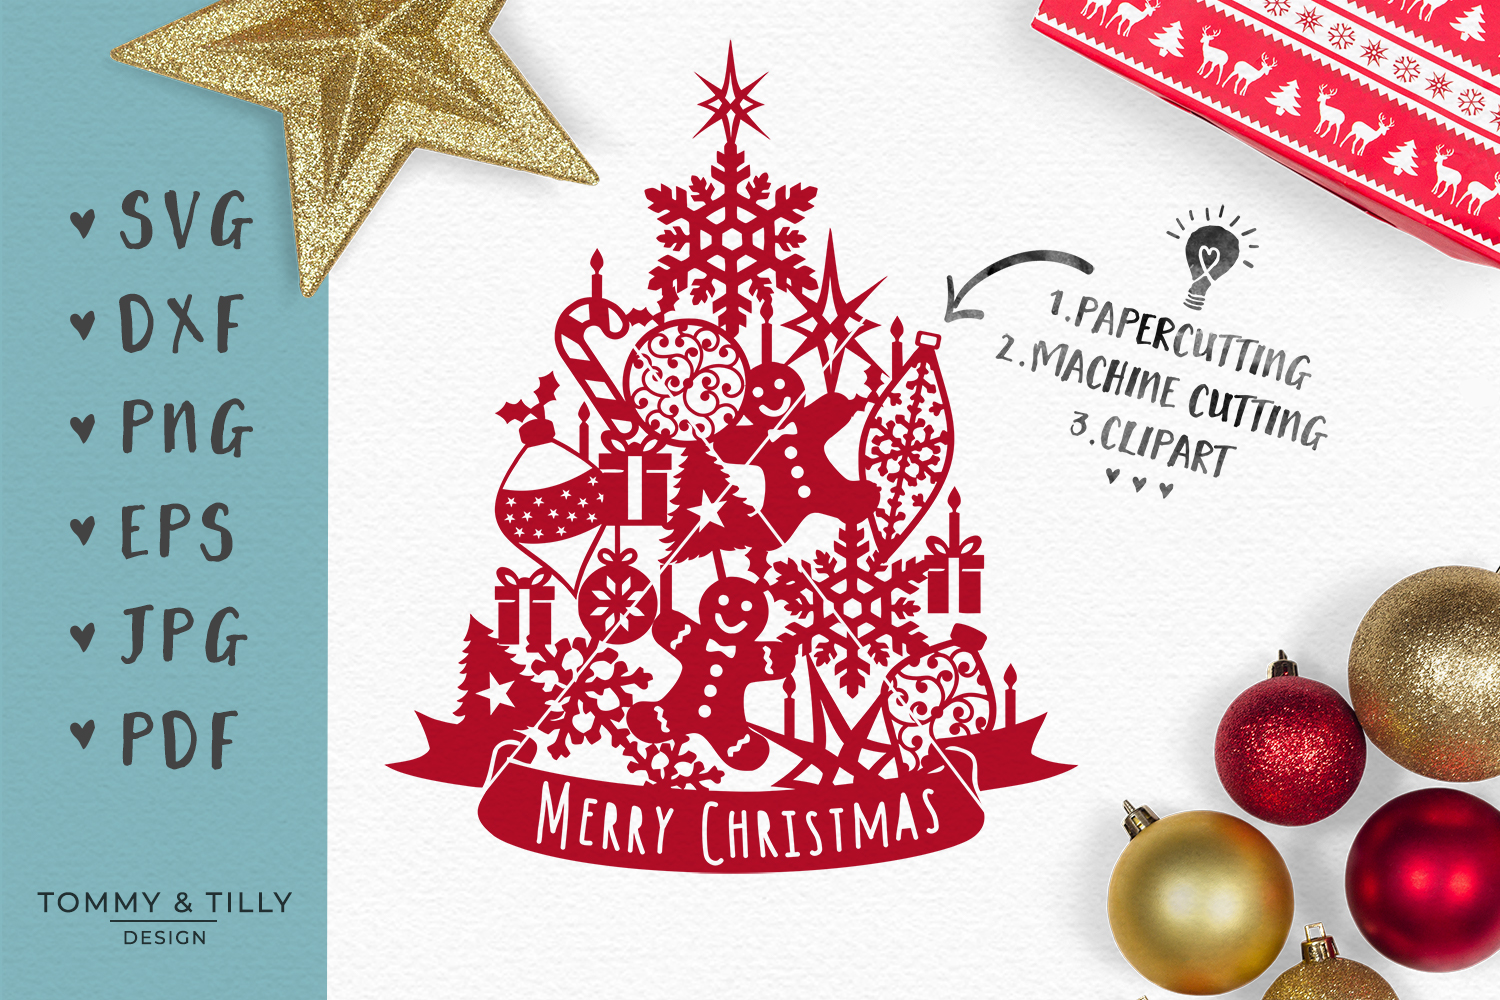 Assorted Christmas Tree - SVG EPS DXF PNG PDF JPG Cut File (119856